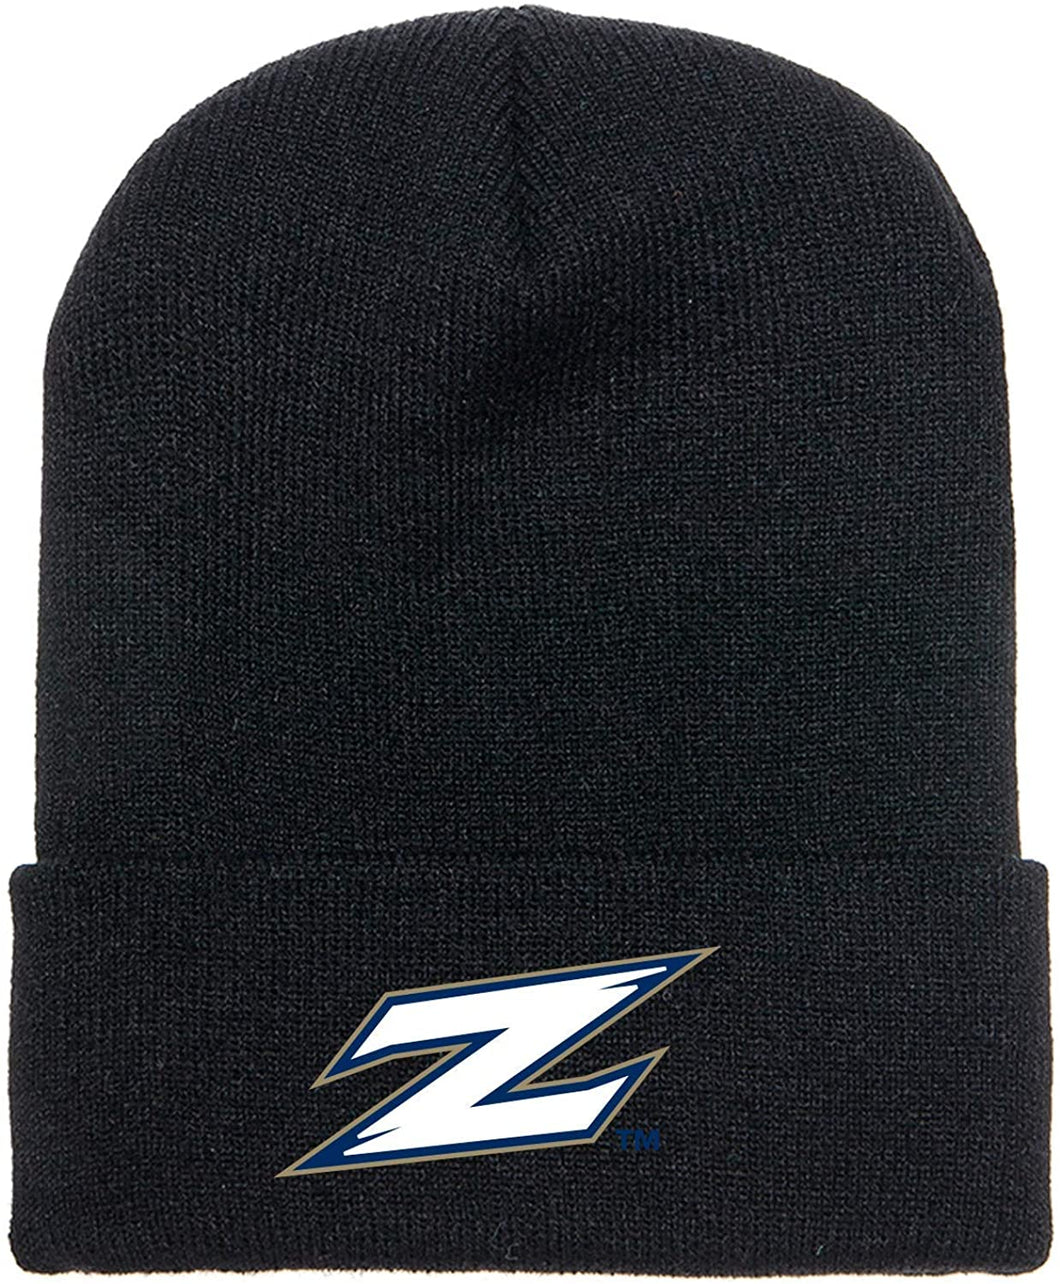 The University of Akron Adult Knit Beanie with Patch